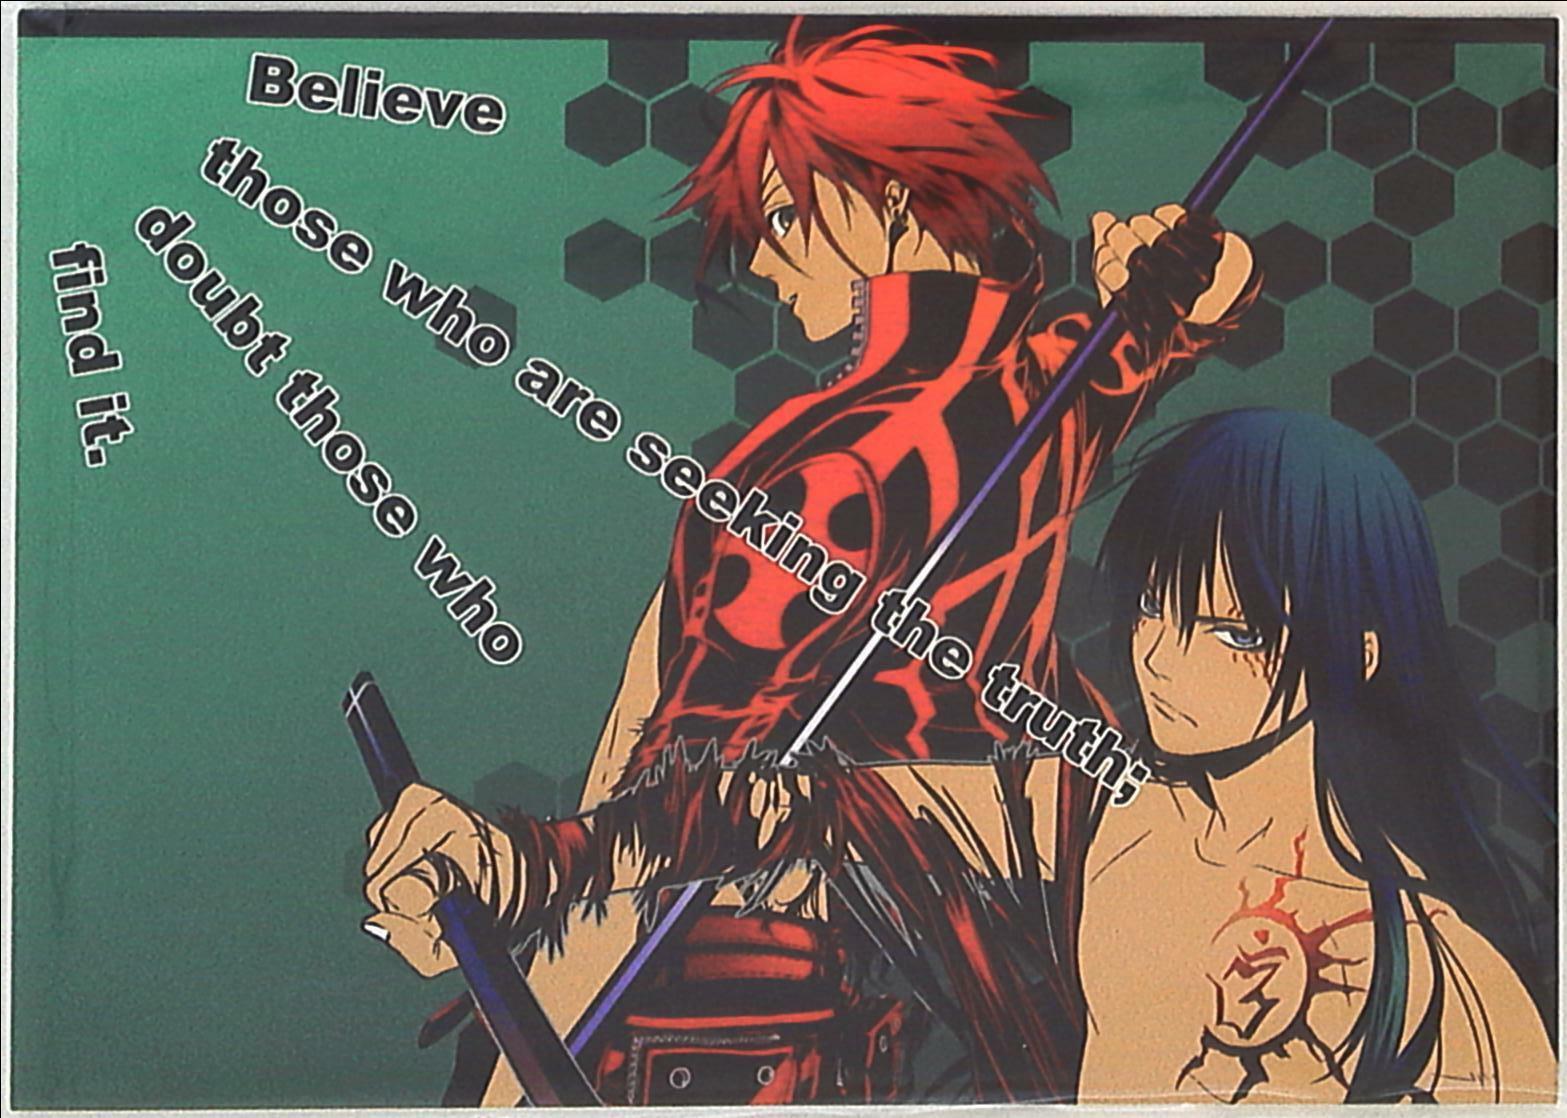 Doujinshi E-PLUS (Odong Mikoto) Believe those who are seeking the truth; ~ (...